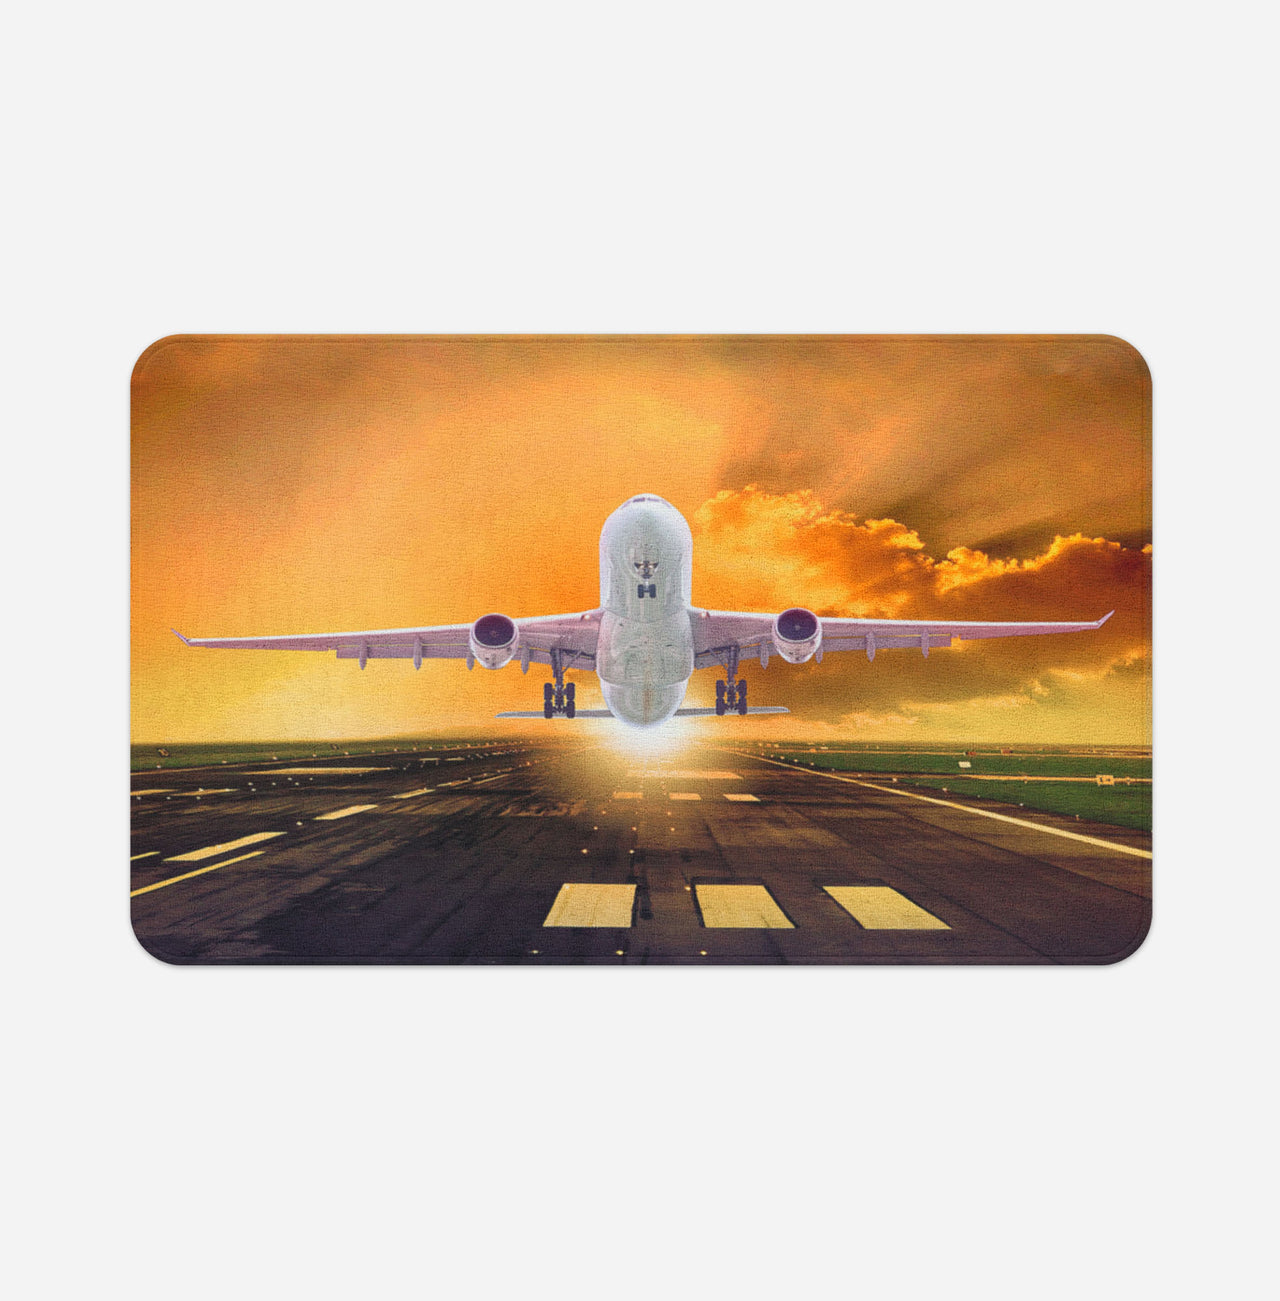 Amazing Departing Aircraft Sunset & Clouds Behind Designed Bath Mats